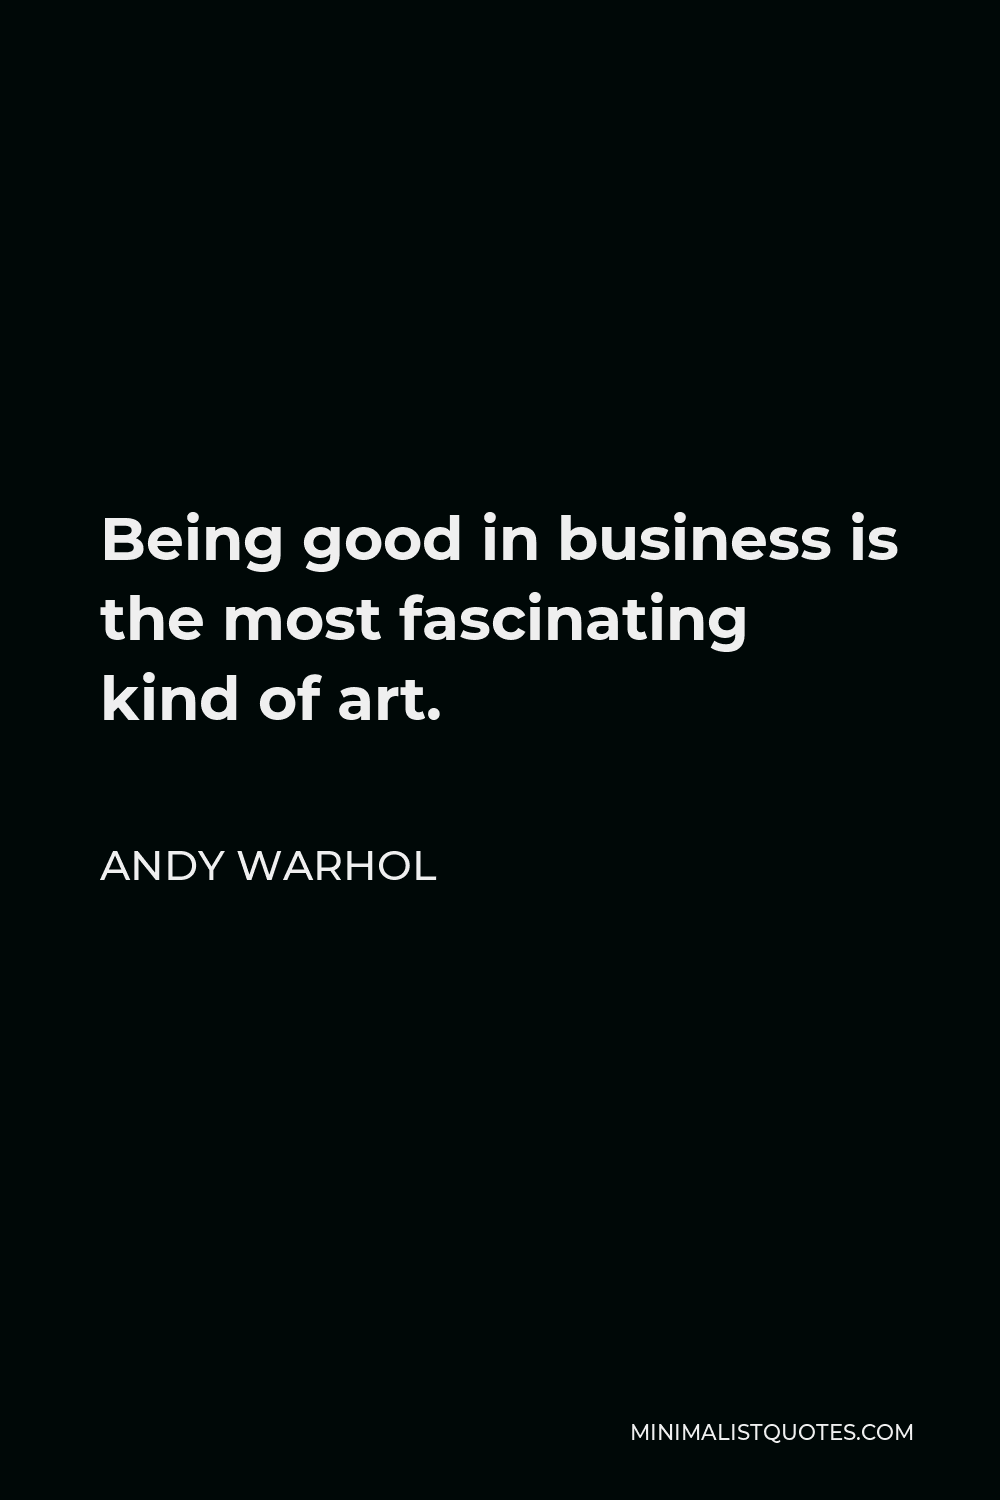 Andy Warhol Quote - Being good in business is the most fascinating kind of art.